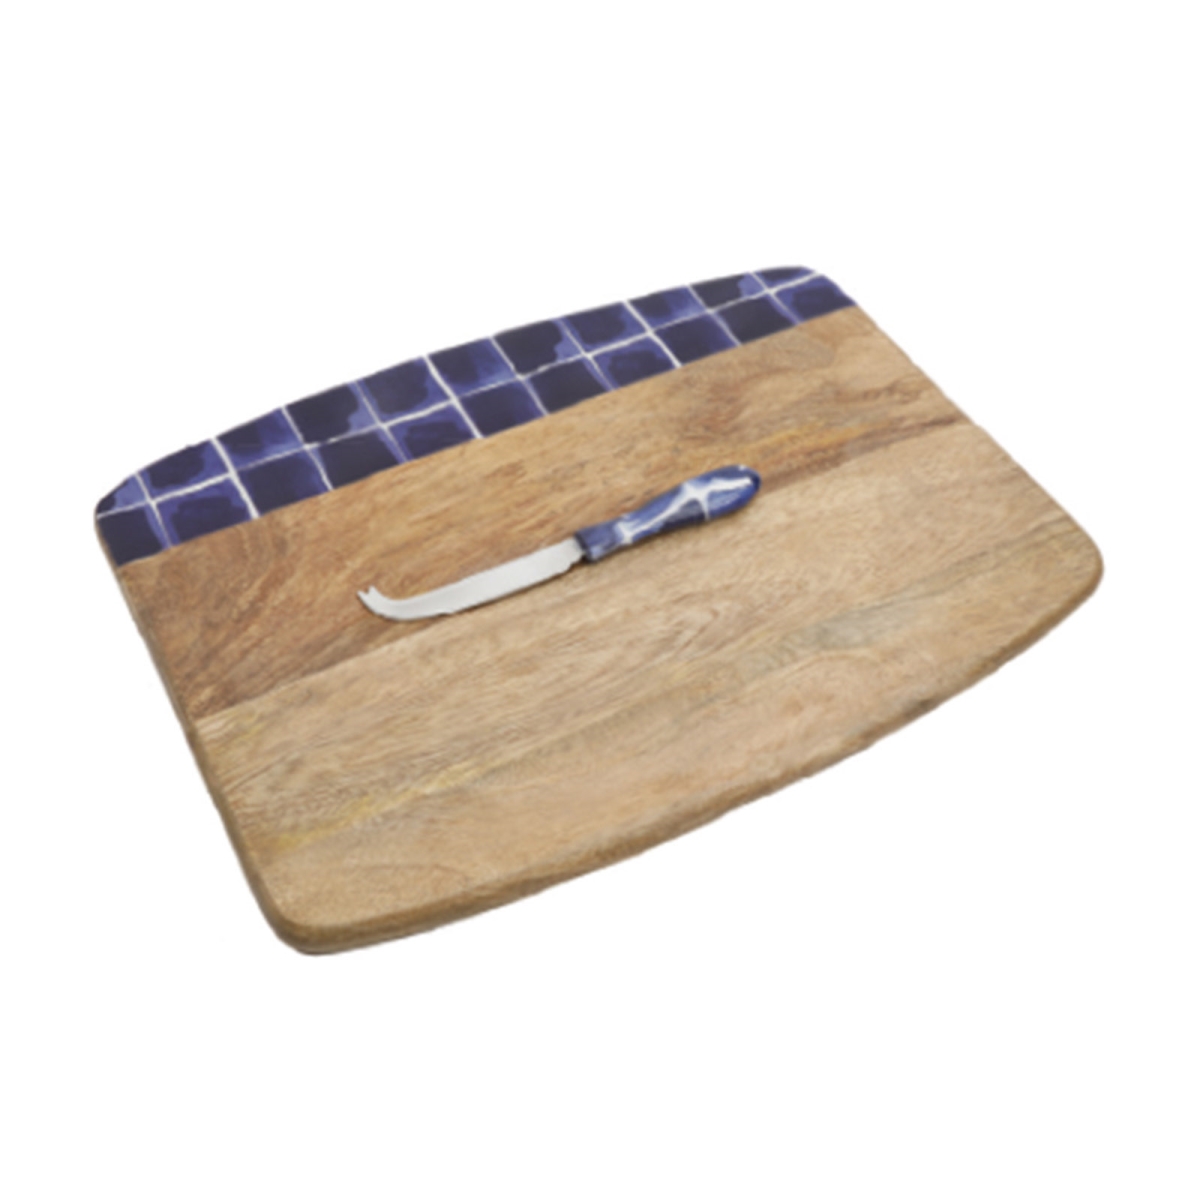 120909.02 15.8 In. Elite Mozambique Enameled Cutting Board With 6 In. Cheese Knifee, Blue Bricks